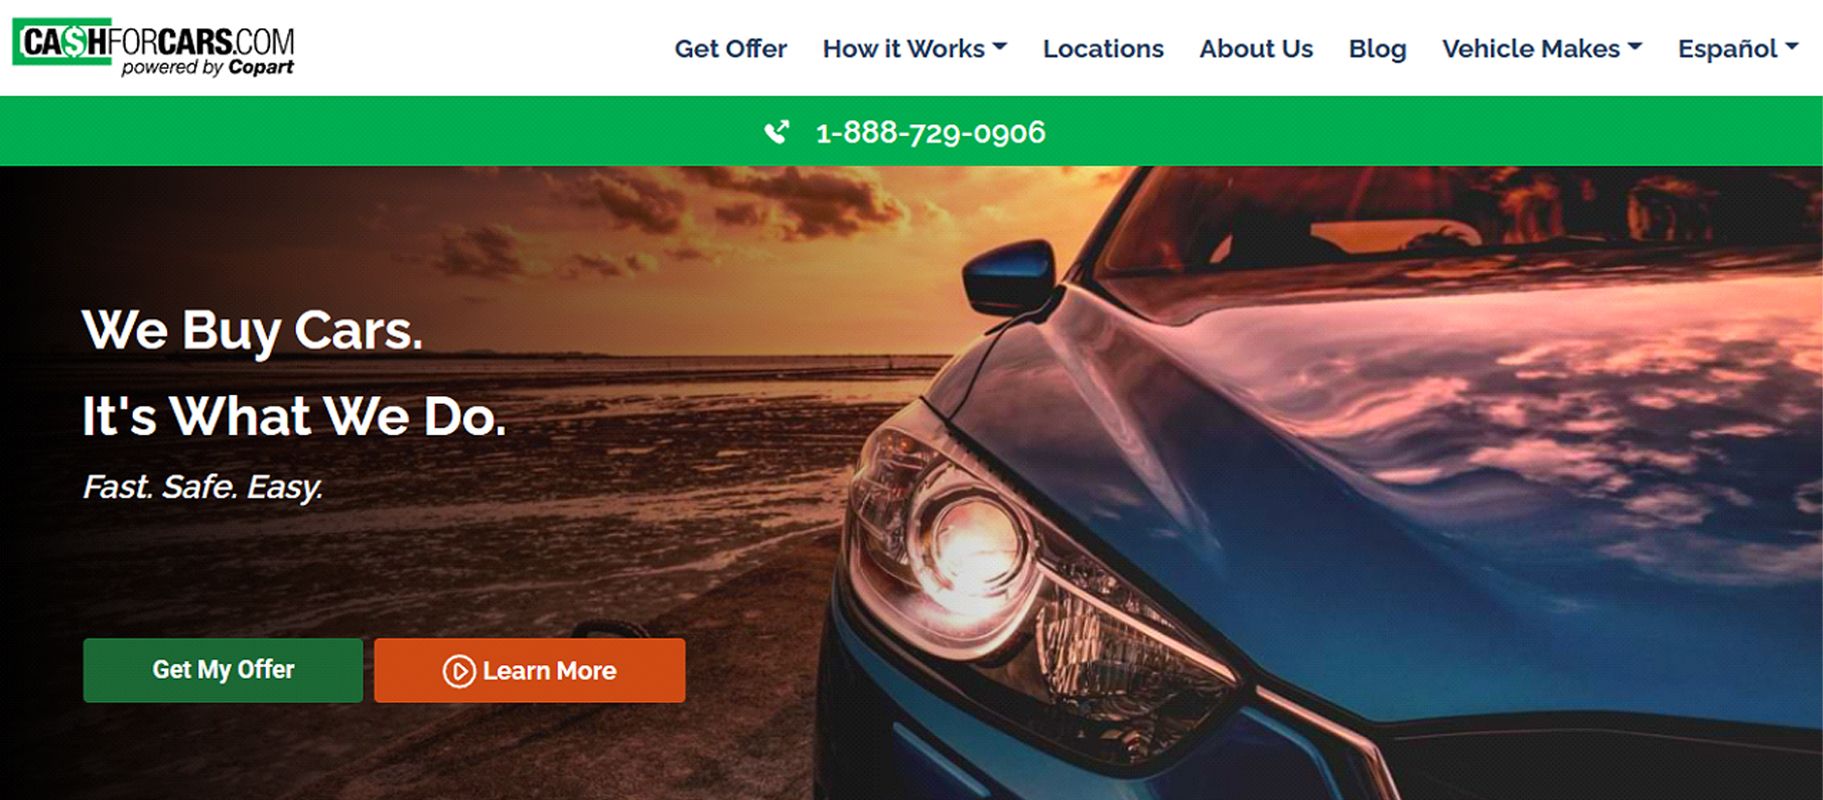 10 Best ways to get cash for cars near me photo 9